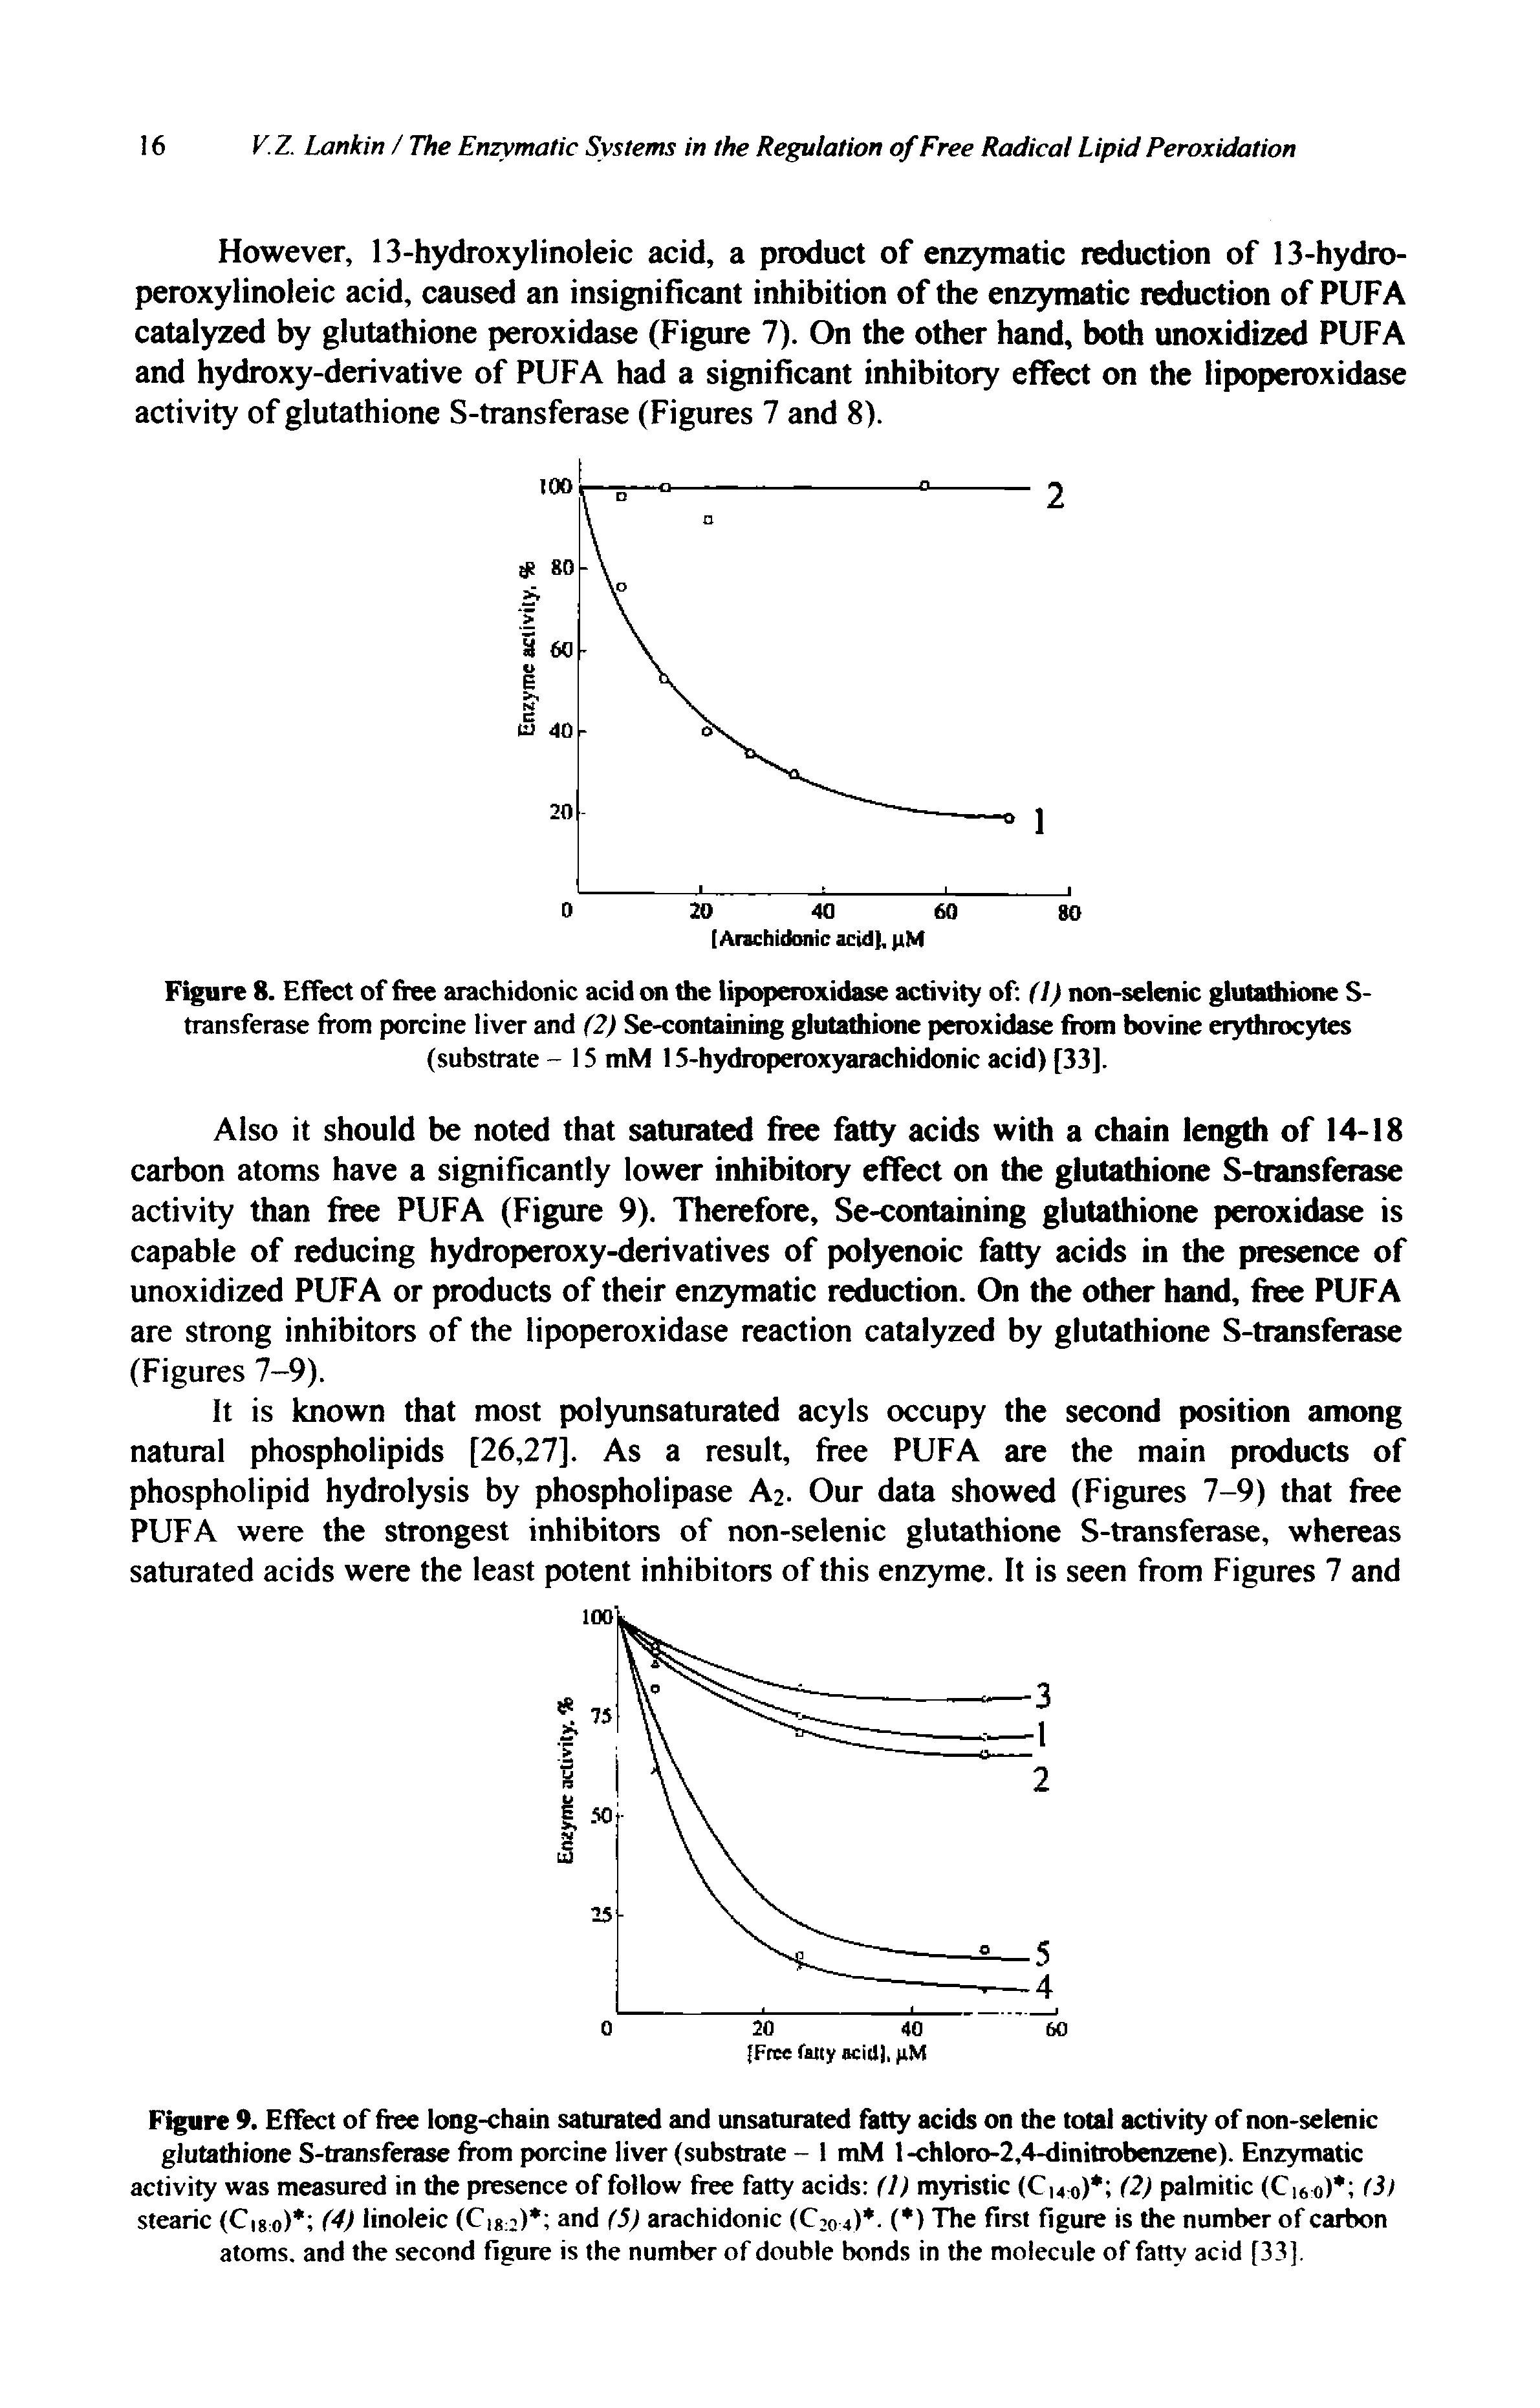 Figure 9. Effect of free long-chain saturated and unsaturated fatty acids on the total activity of non-selenic glutathione S-transferase from porcine liver (substrate - 1 mM 1-chloro-2,4-dinitrobenzene). Enzymatic activity was measured in the presence of follow free fatty acids fl) myristic (Cu o) (2) palmitic (C16 0) (3) stearic (C g o) (4) linoleic (Cigo) and (5) arachidonic (C20 4) - ( ) The first figure is the number of carbon atoms, and the second figure is the number of double bonds in the molecule of fatty acid [33],...